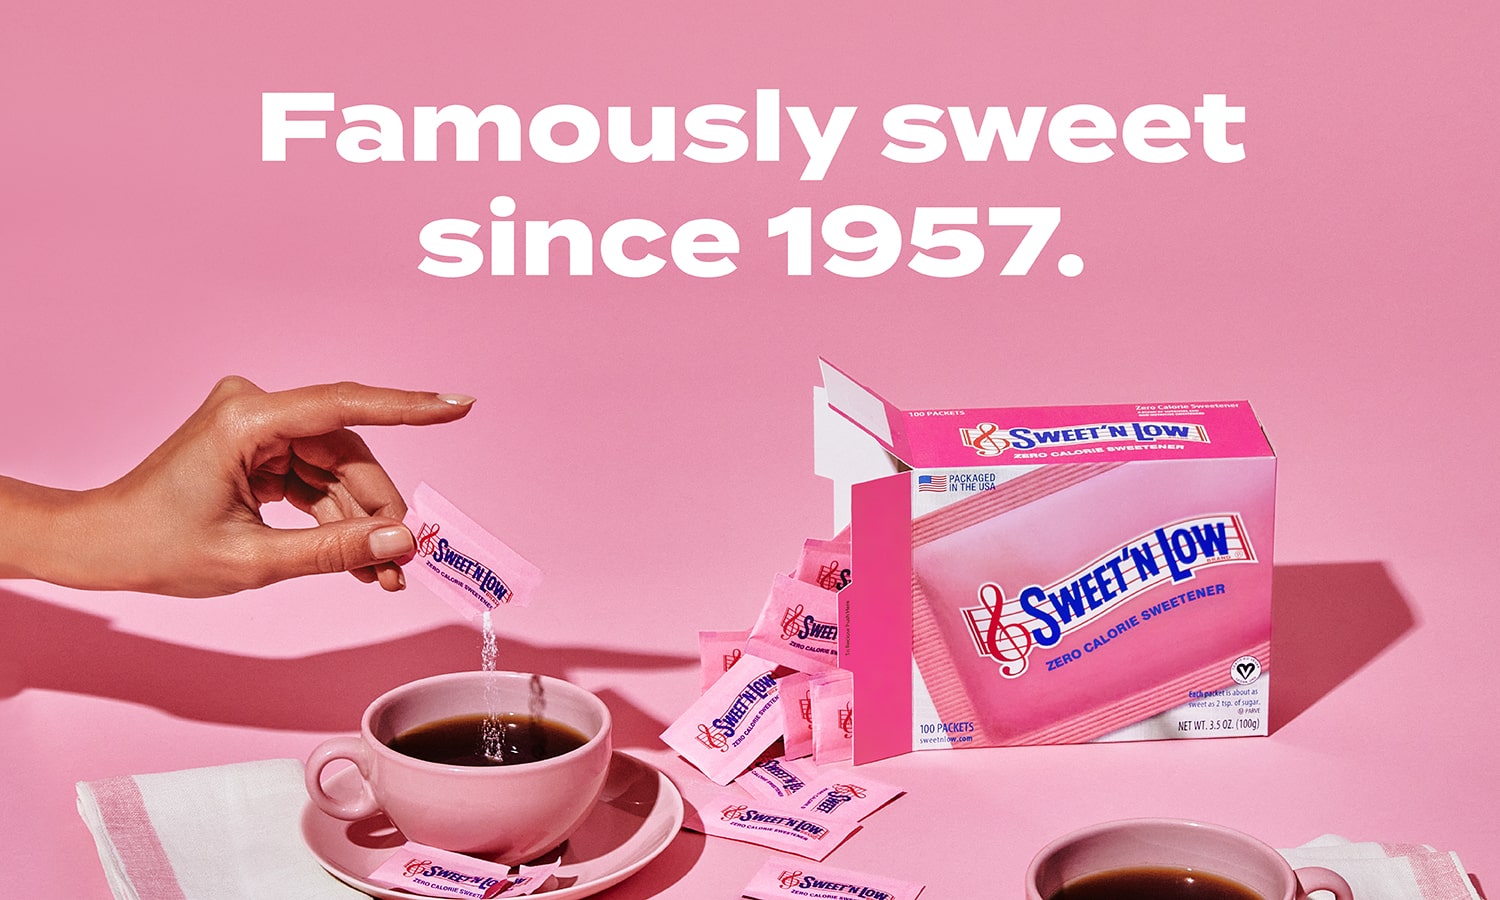 Famously sweet since 1957.